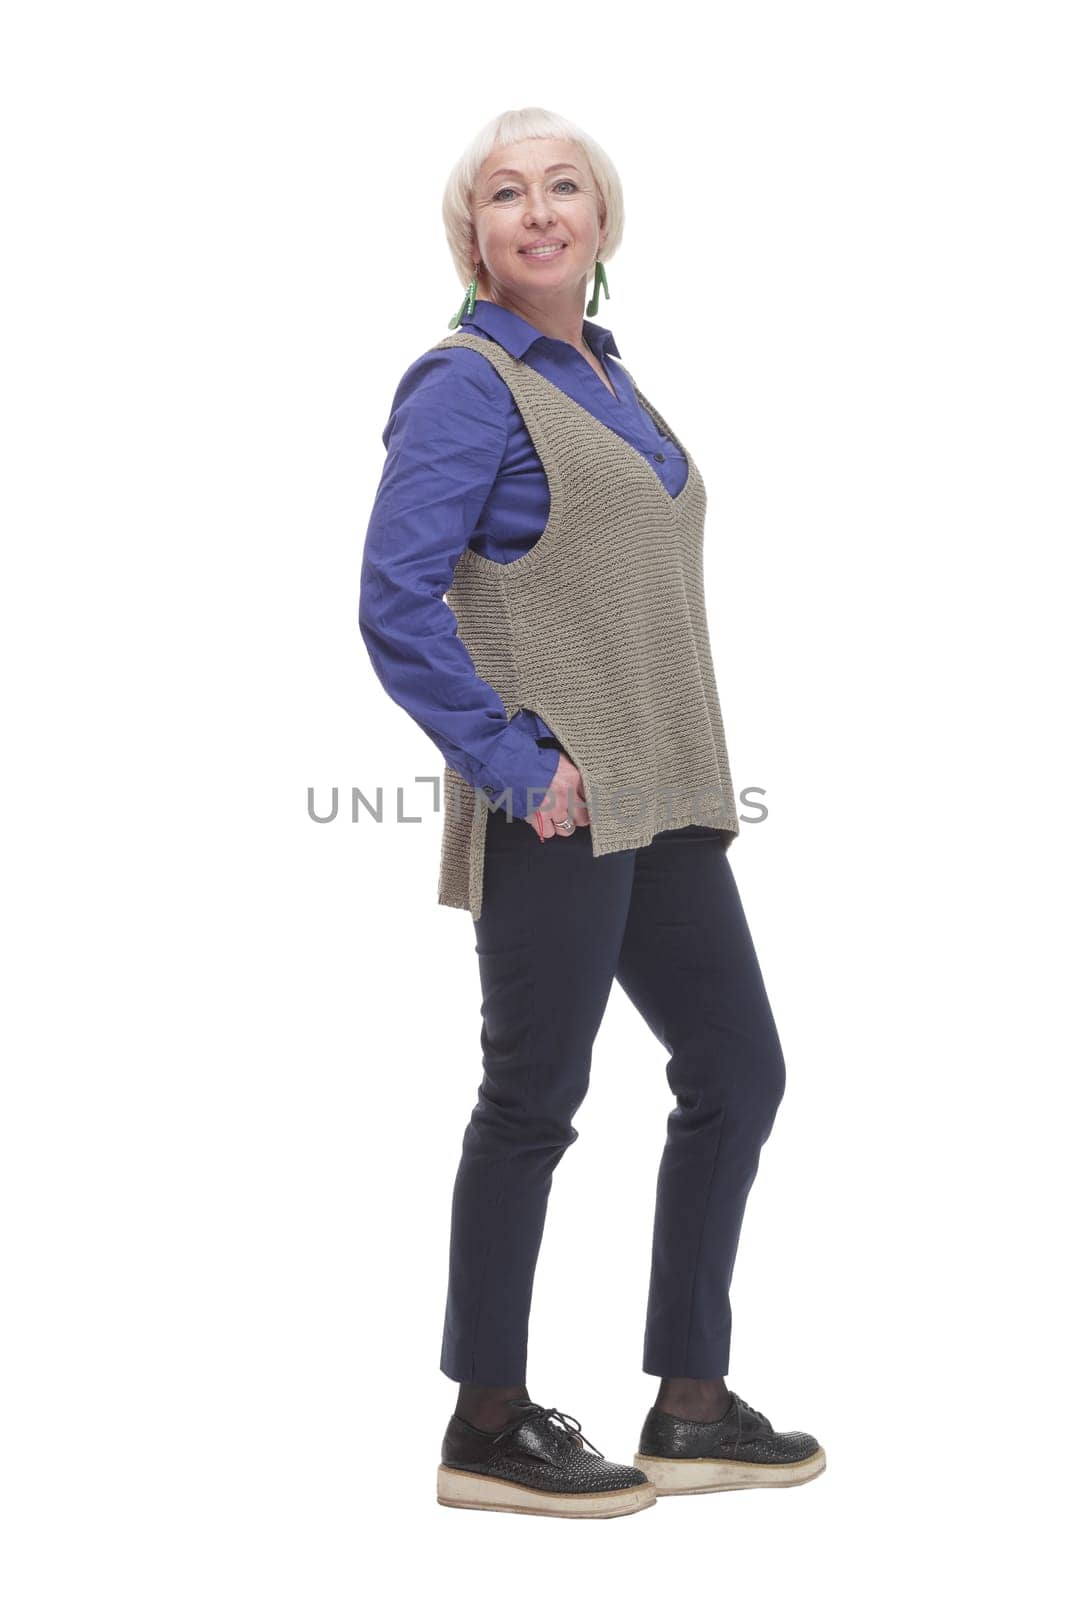 in full growth. attractive Mature woman in a gray vest. isolated on a white background.